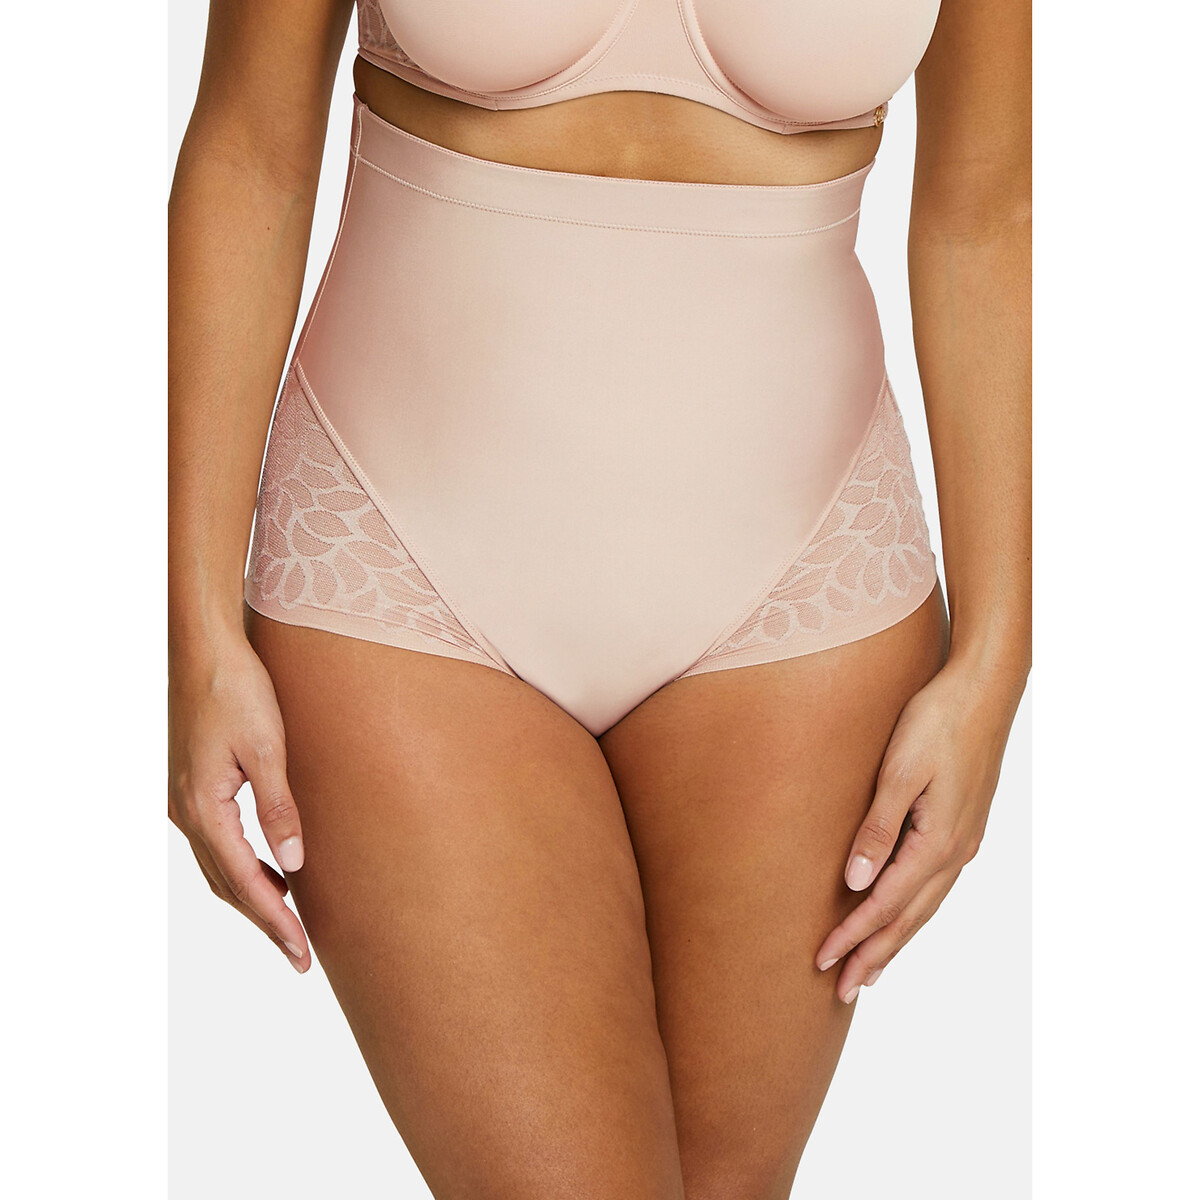 Diam's Control Modern knickers in white